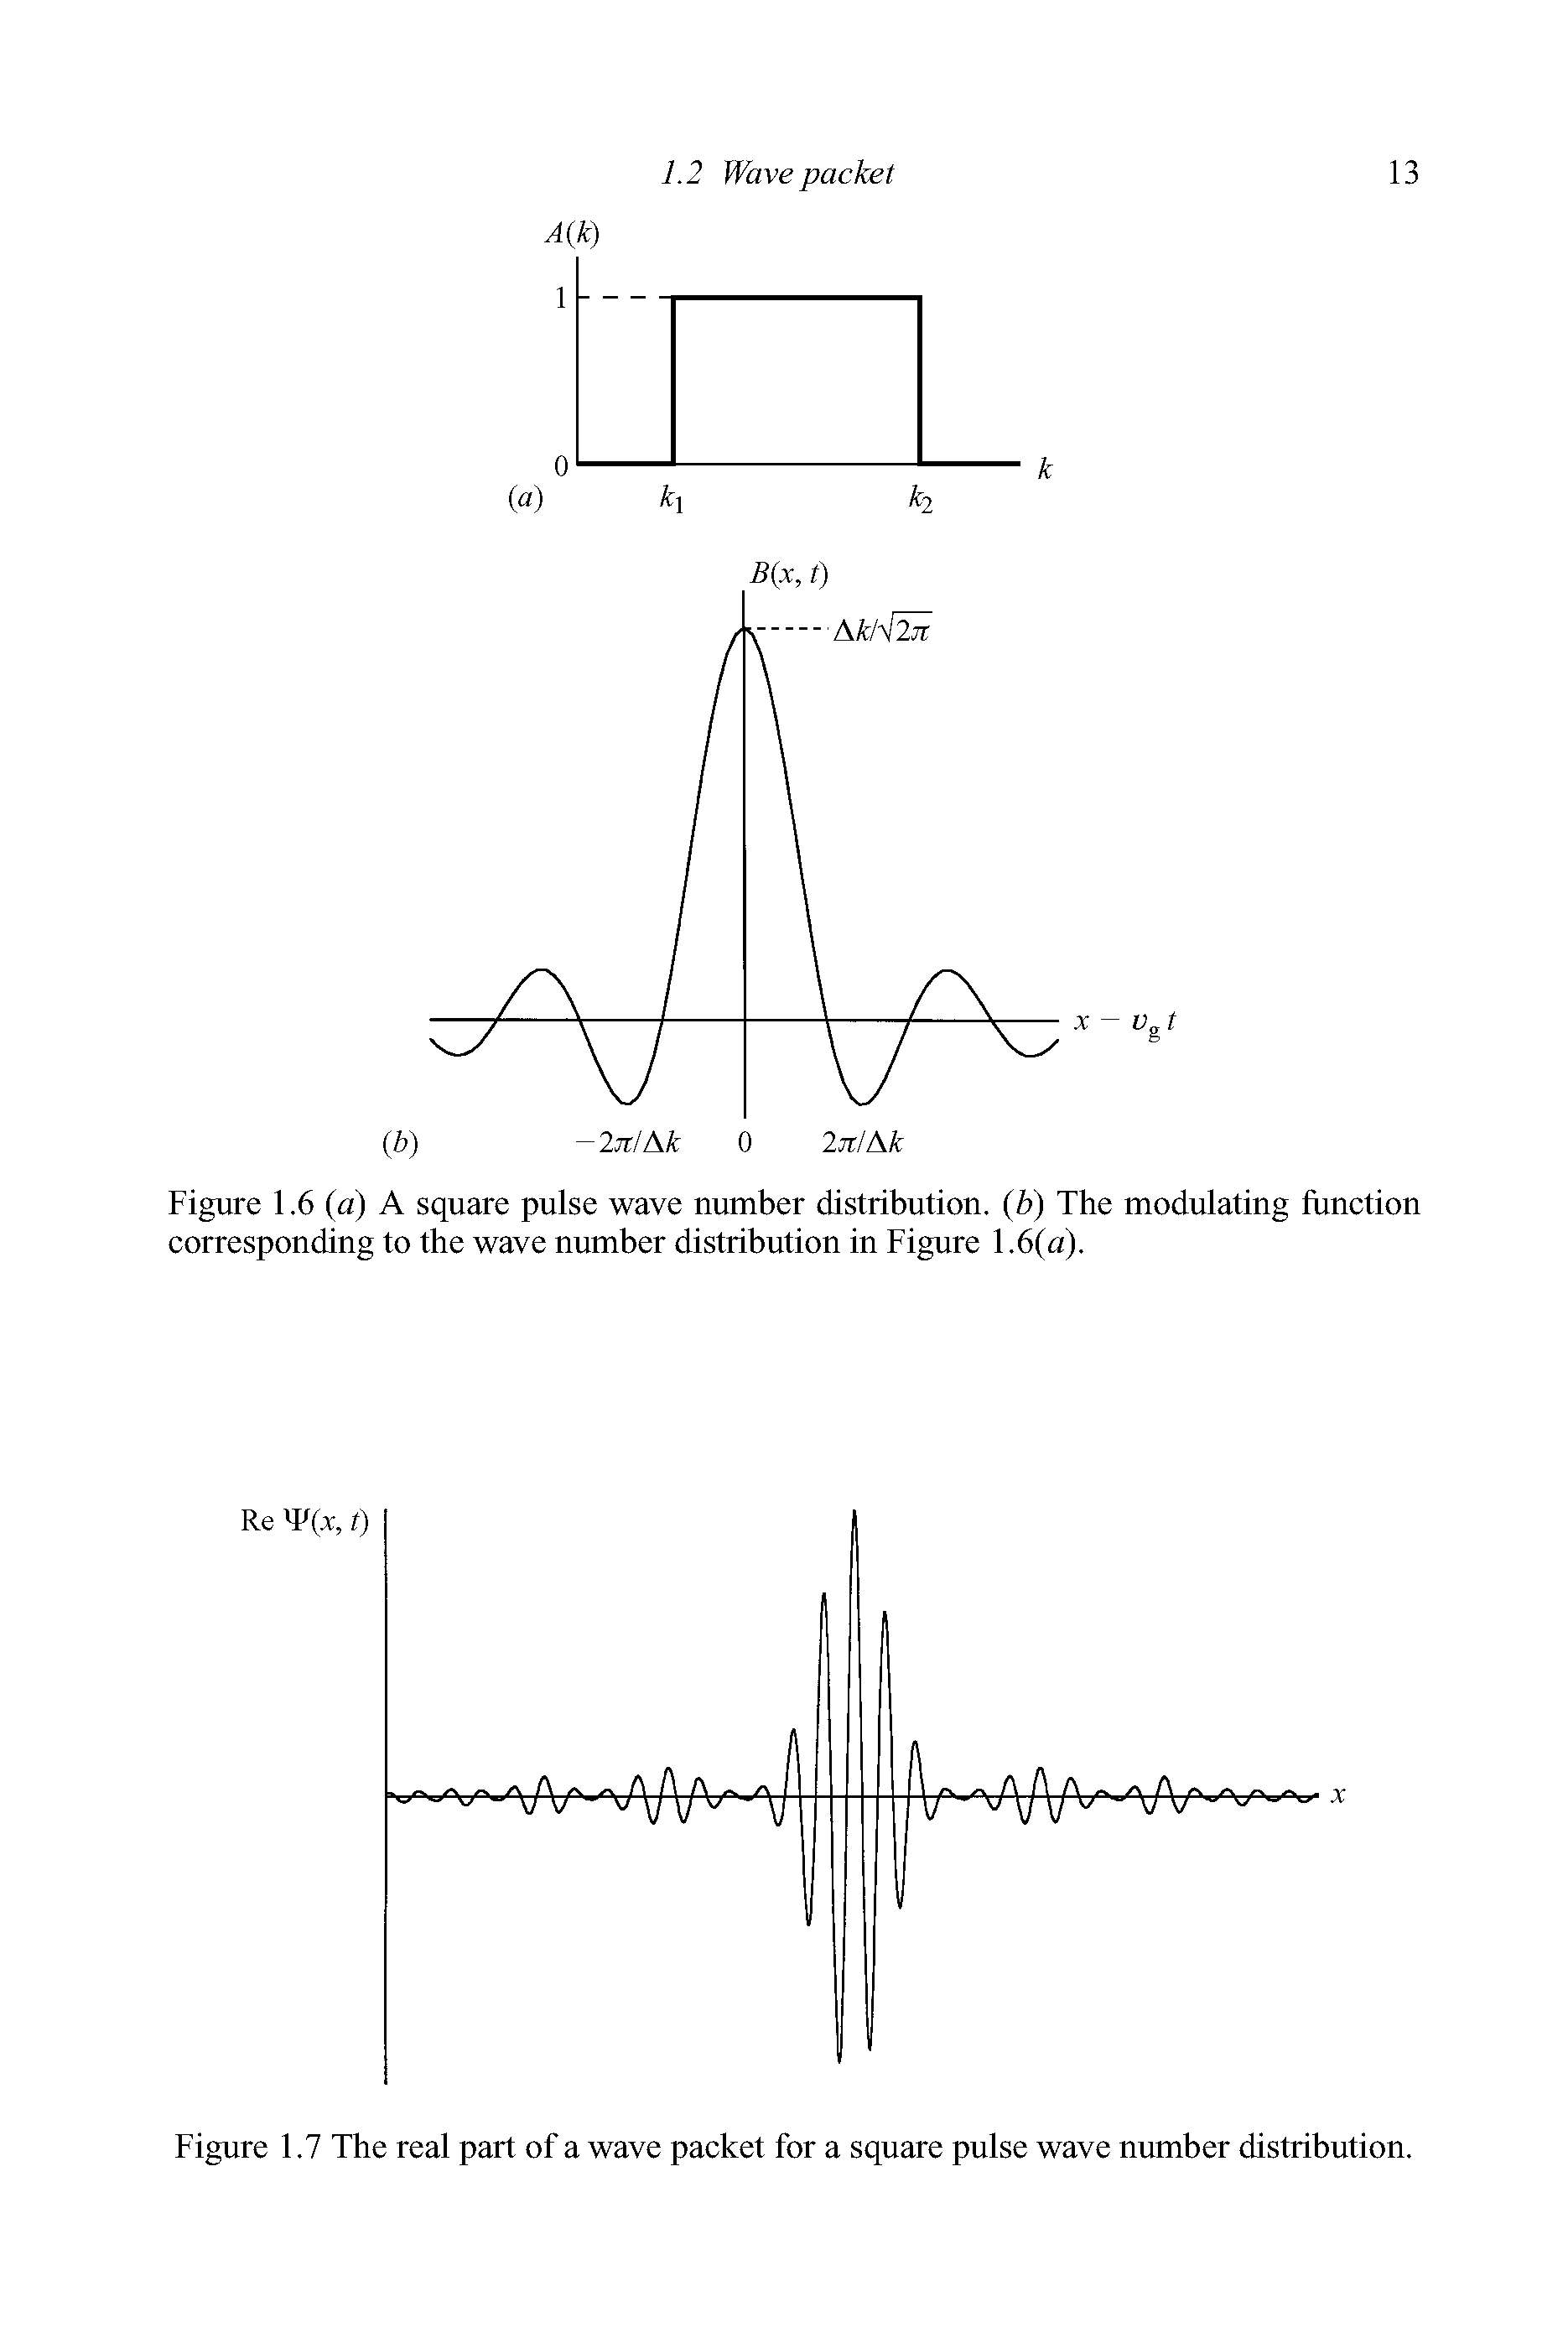 Figure 1.7 The real part of a wave packet for a square pulse wave number distribution.